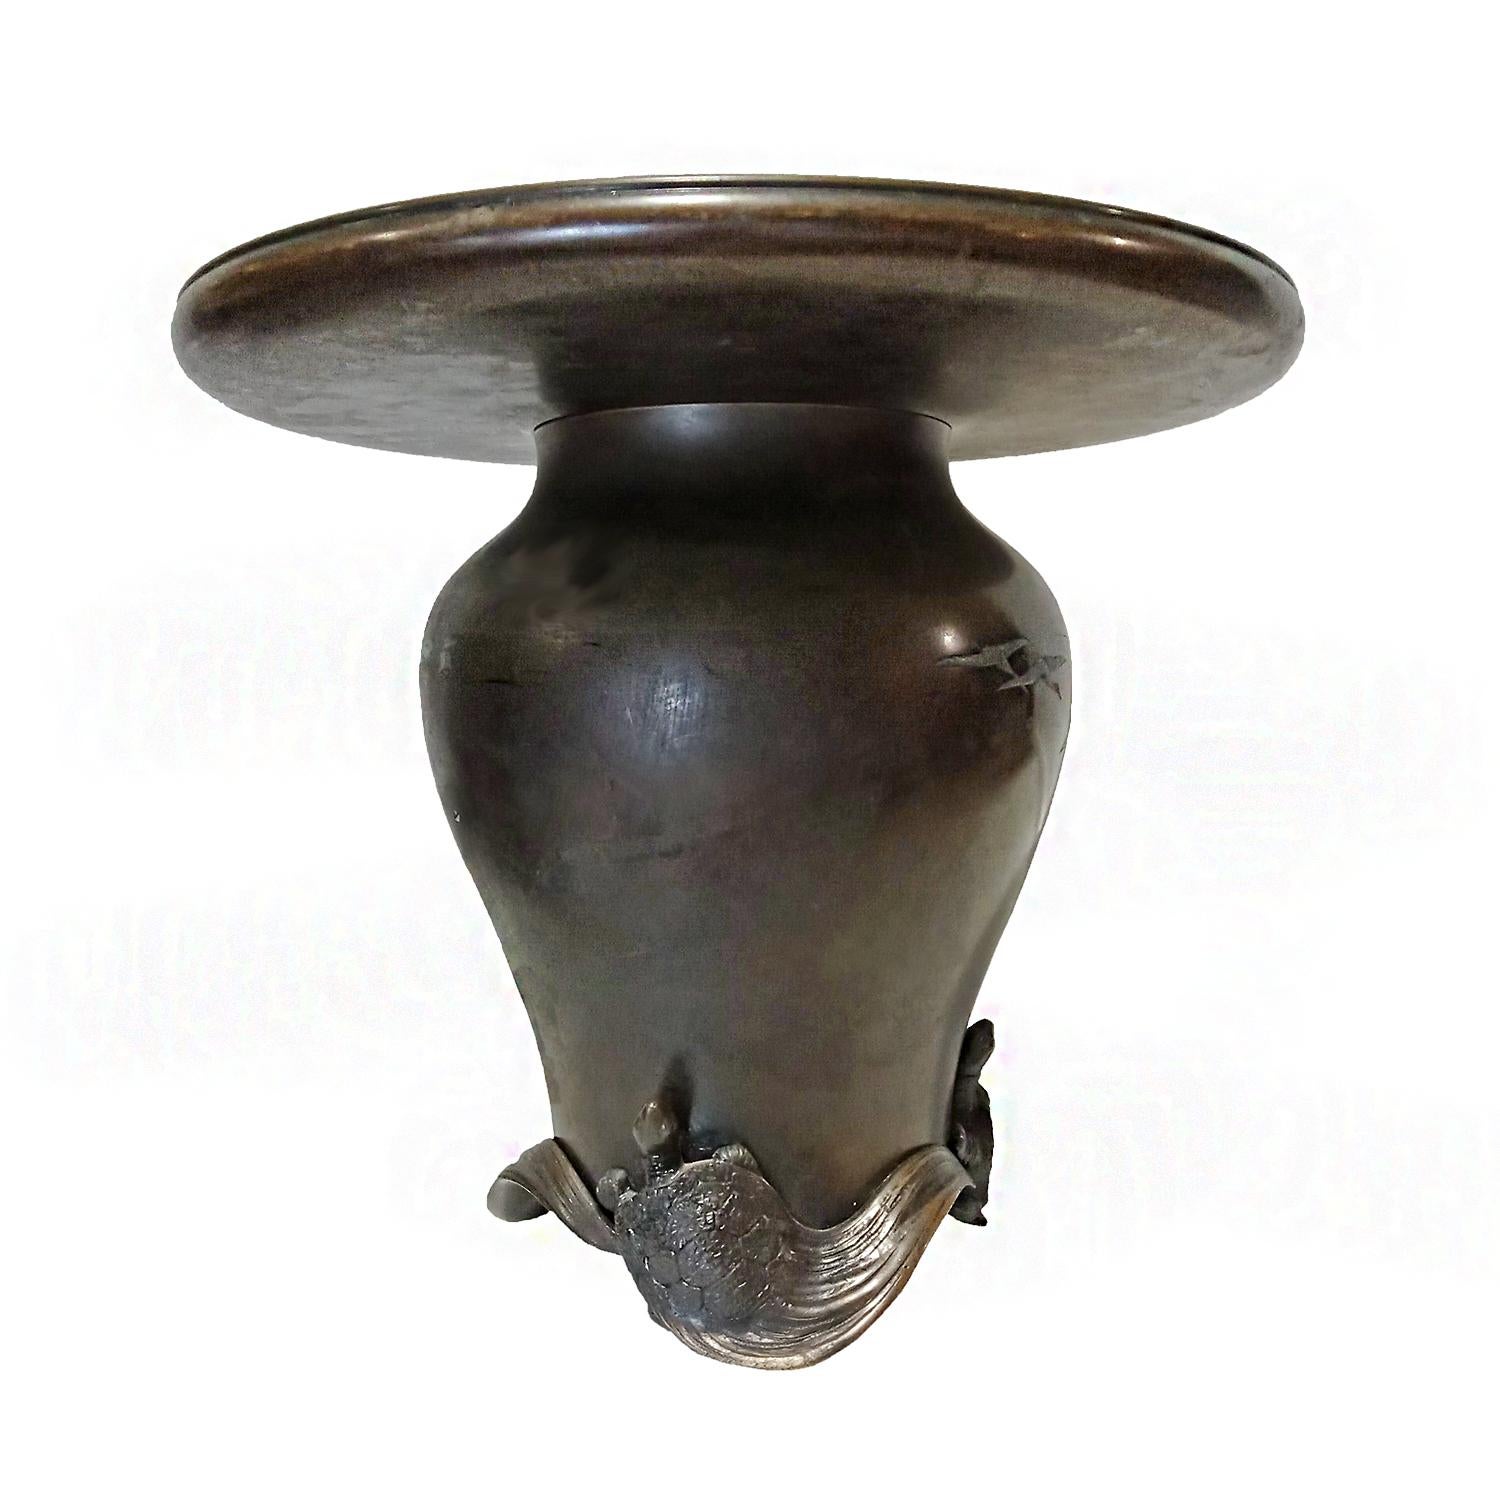 A unique Japanese vase, hand-crafted in bronze. Meiji Period, circa 1890. Decorated with embossed cranes and a gilt sun symbol. At the bottom, the vase is nested in an exquisitely carved base with three turtles, which according to traditional